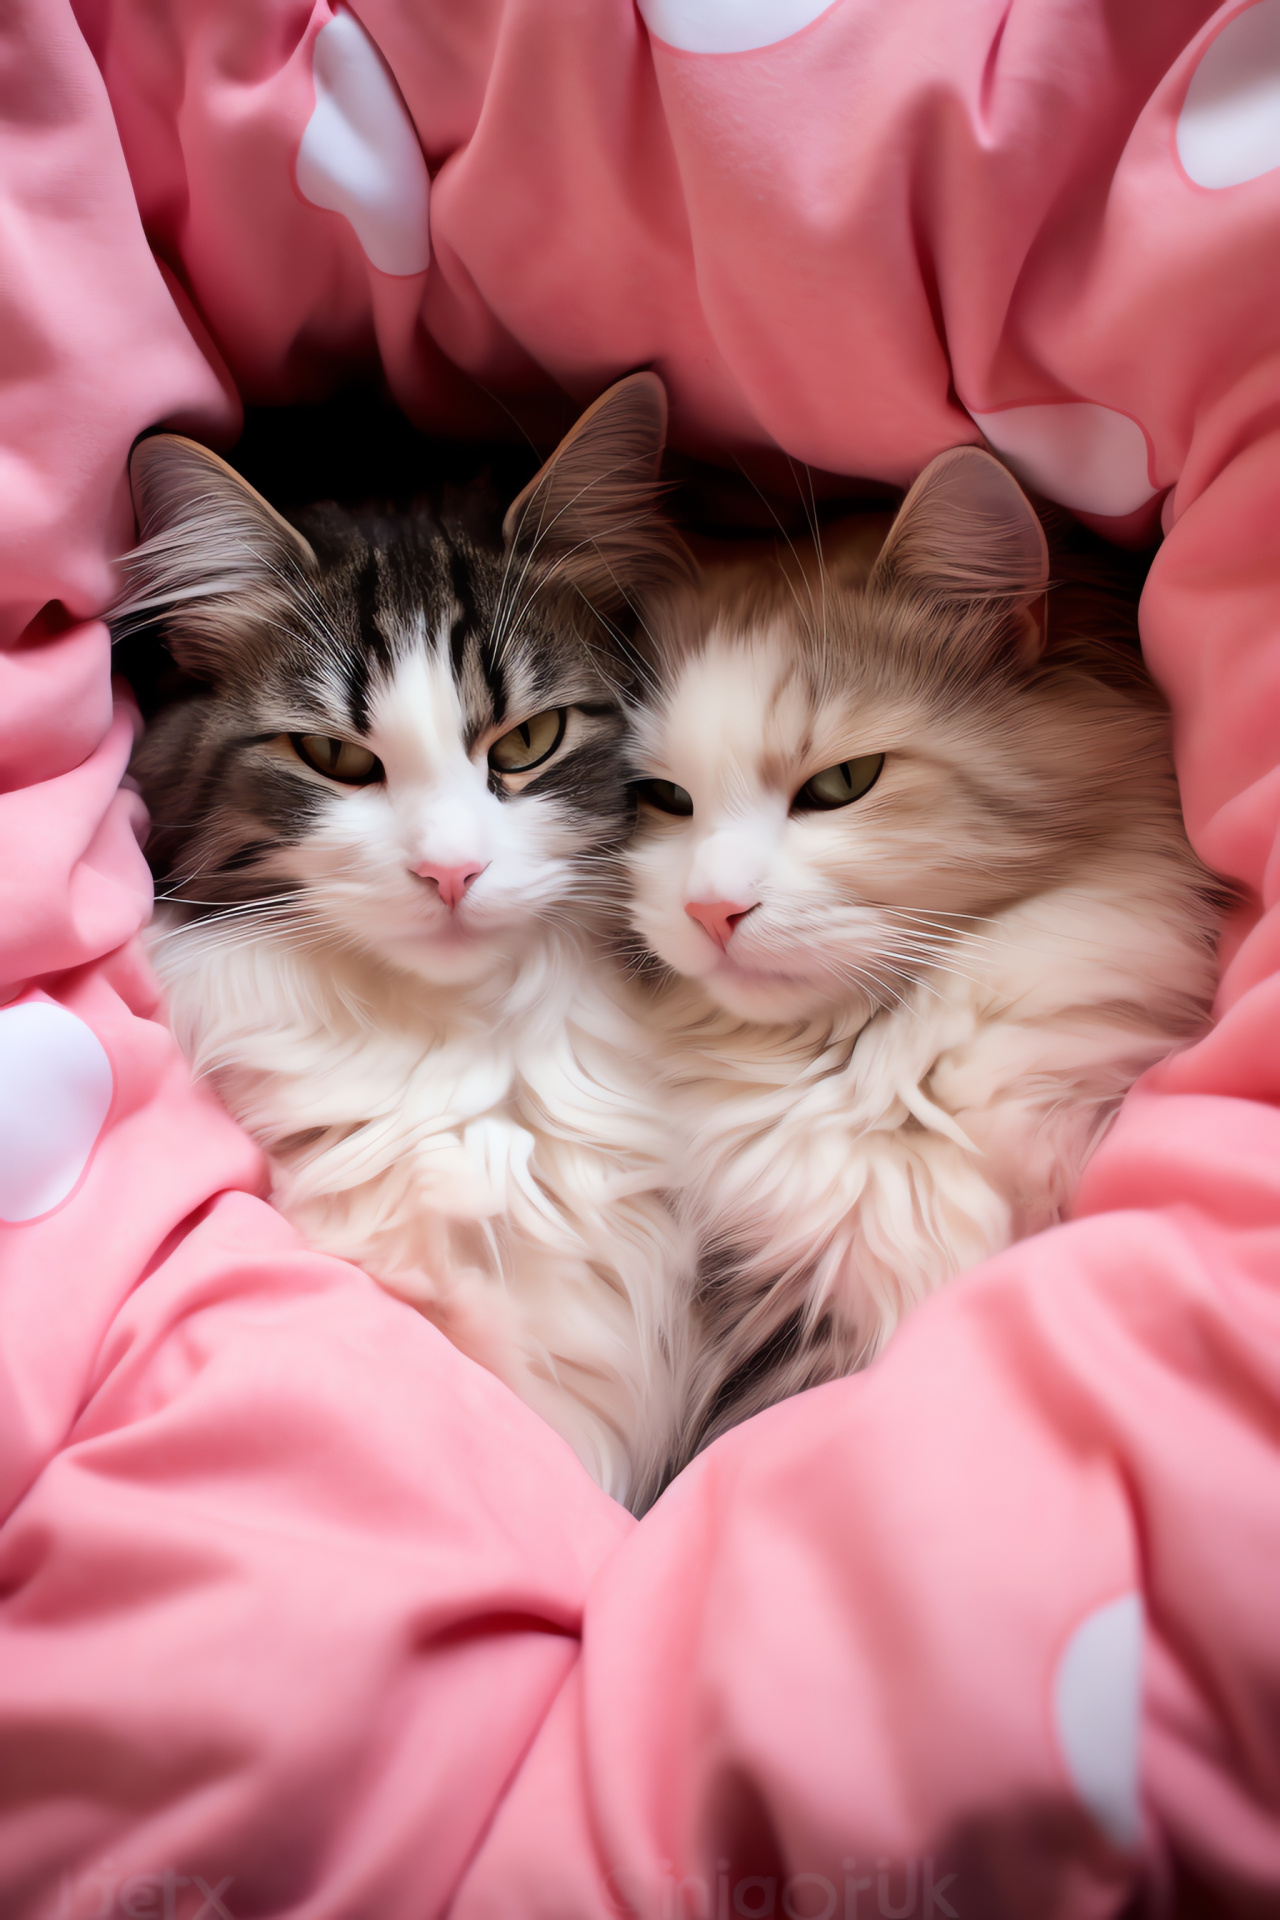 Napping felines, Romantic bedding, Plush covers, Cushioned hearts, HD Phone Image